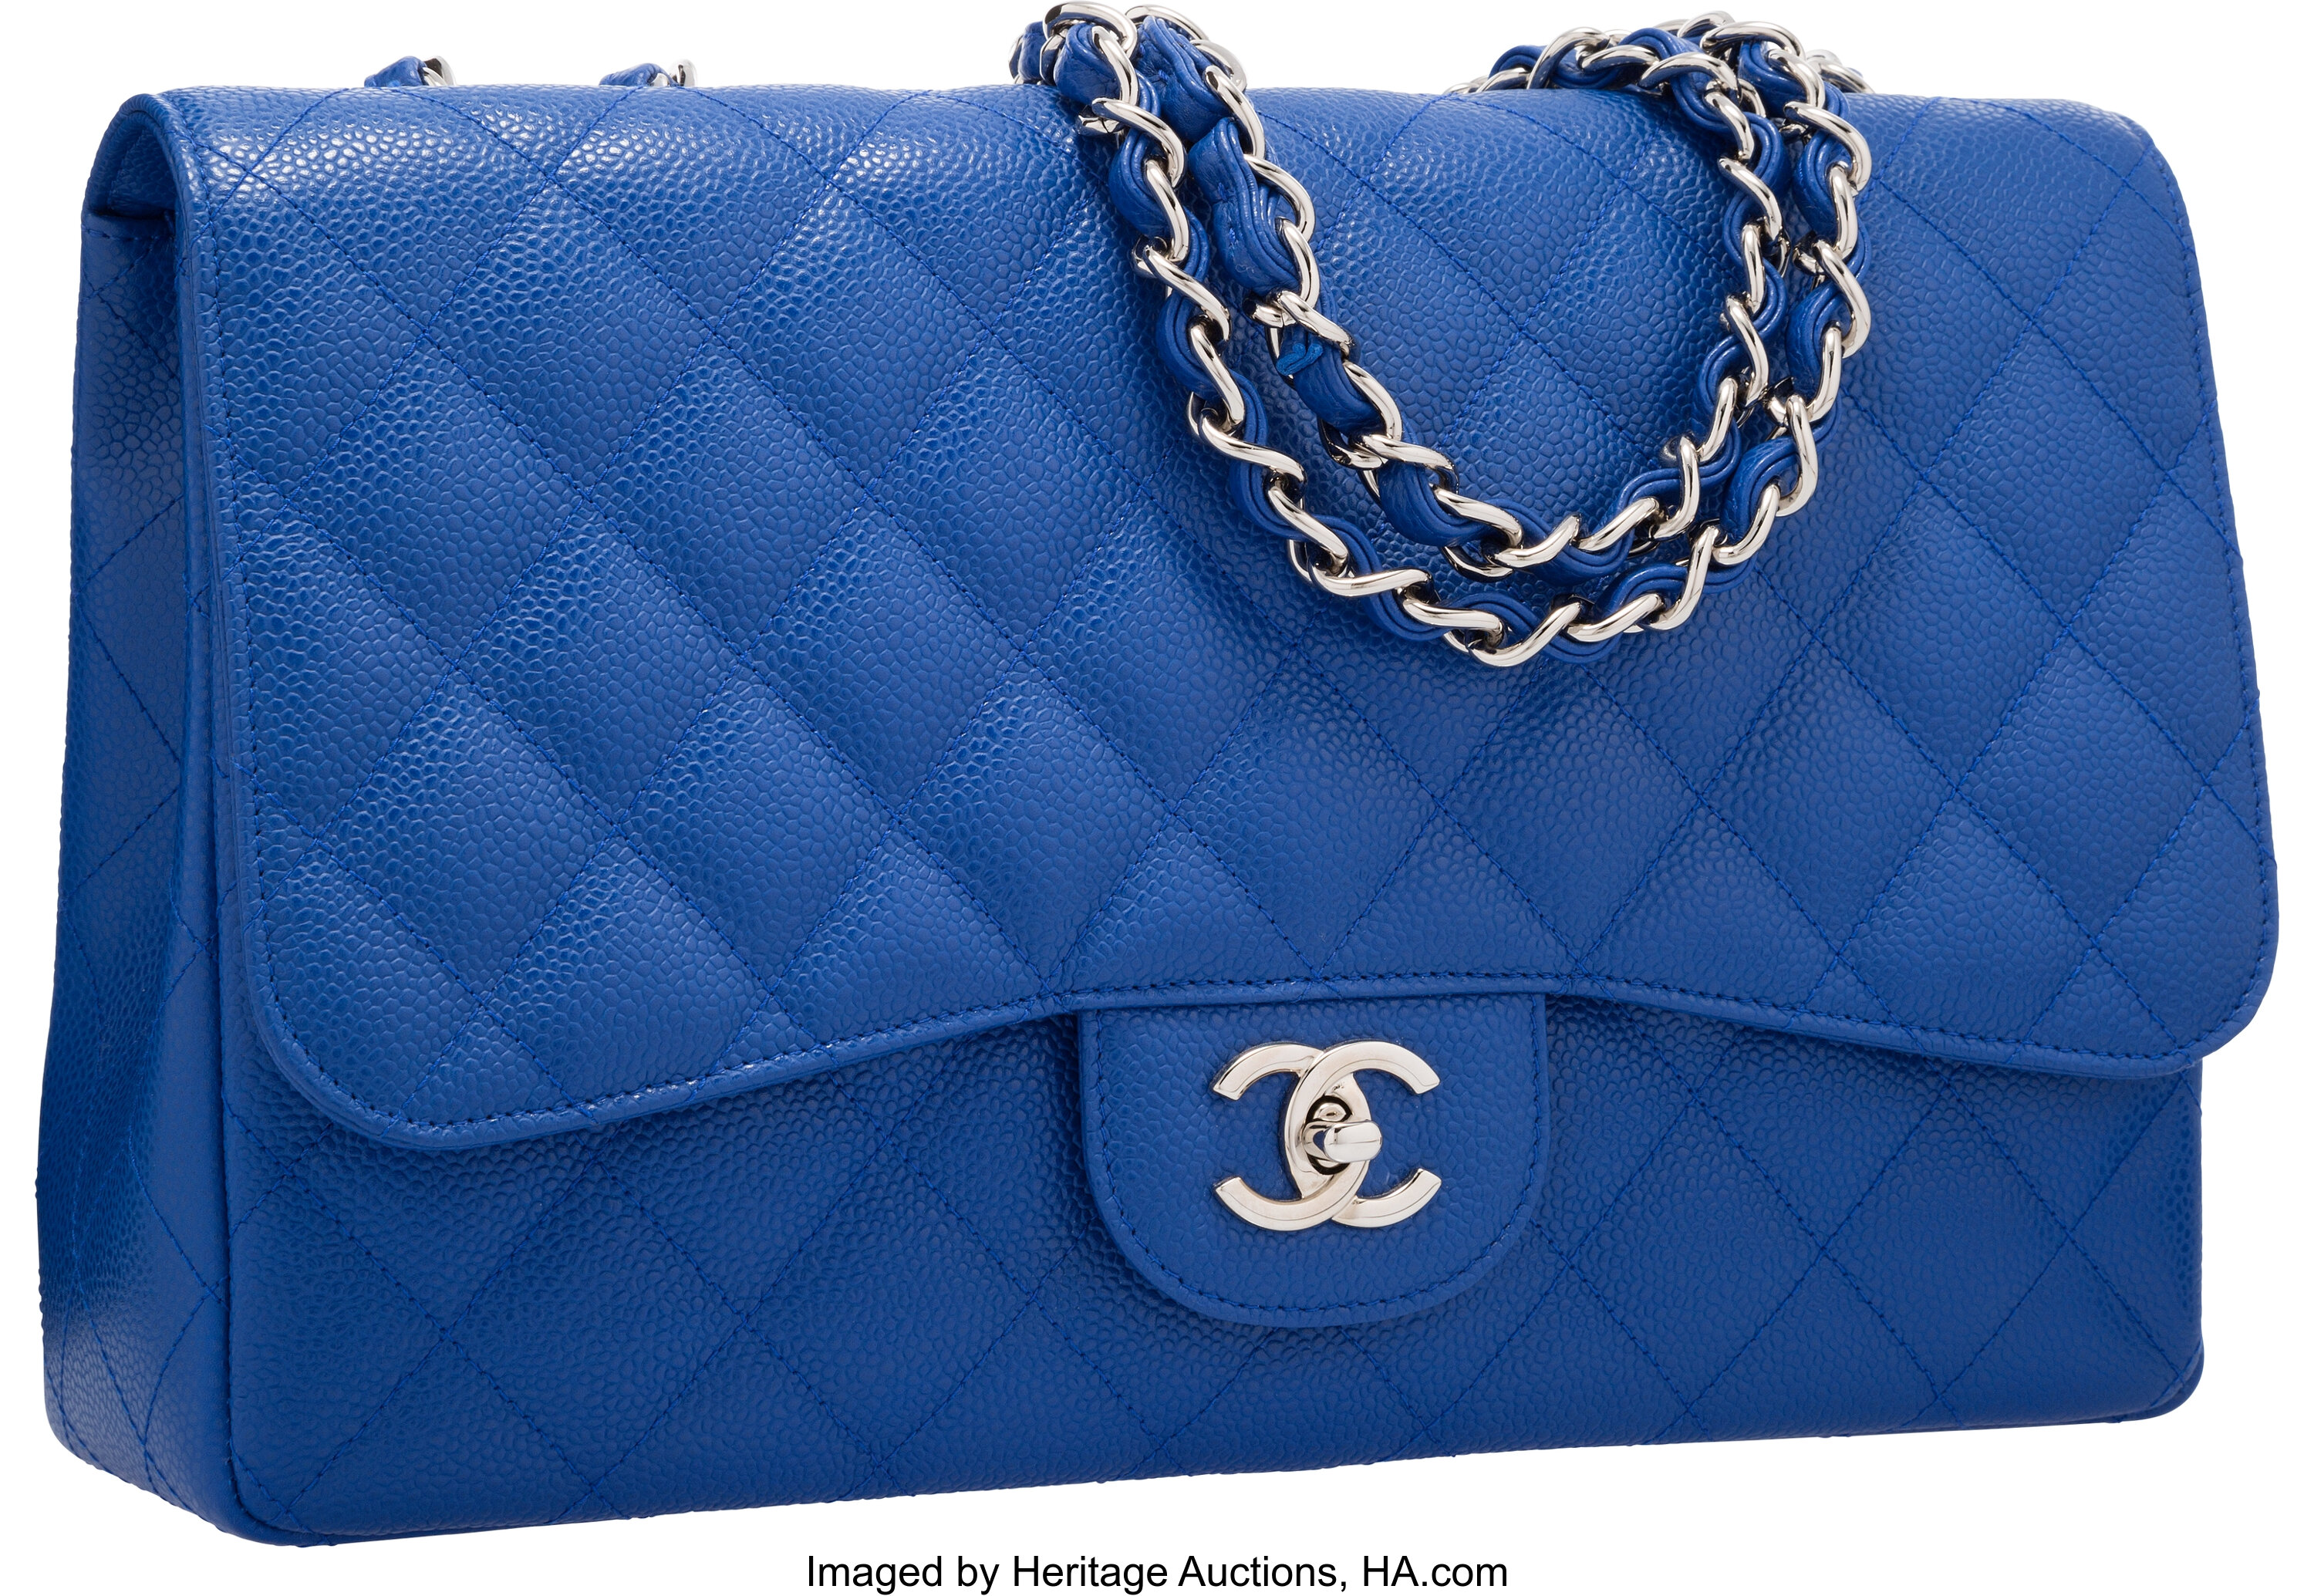 Chanel Blue Quilted Caviar Leather Jumbo Single Flap Bag with